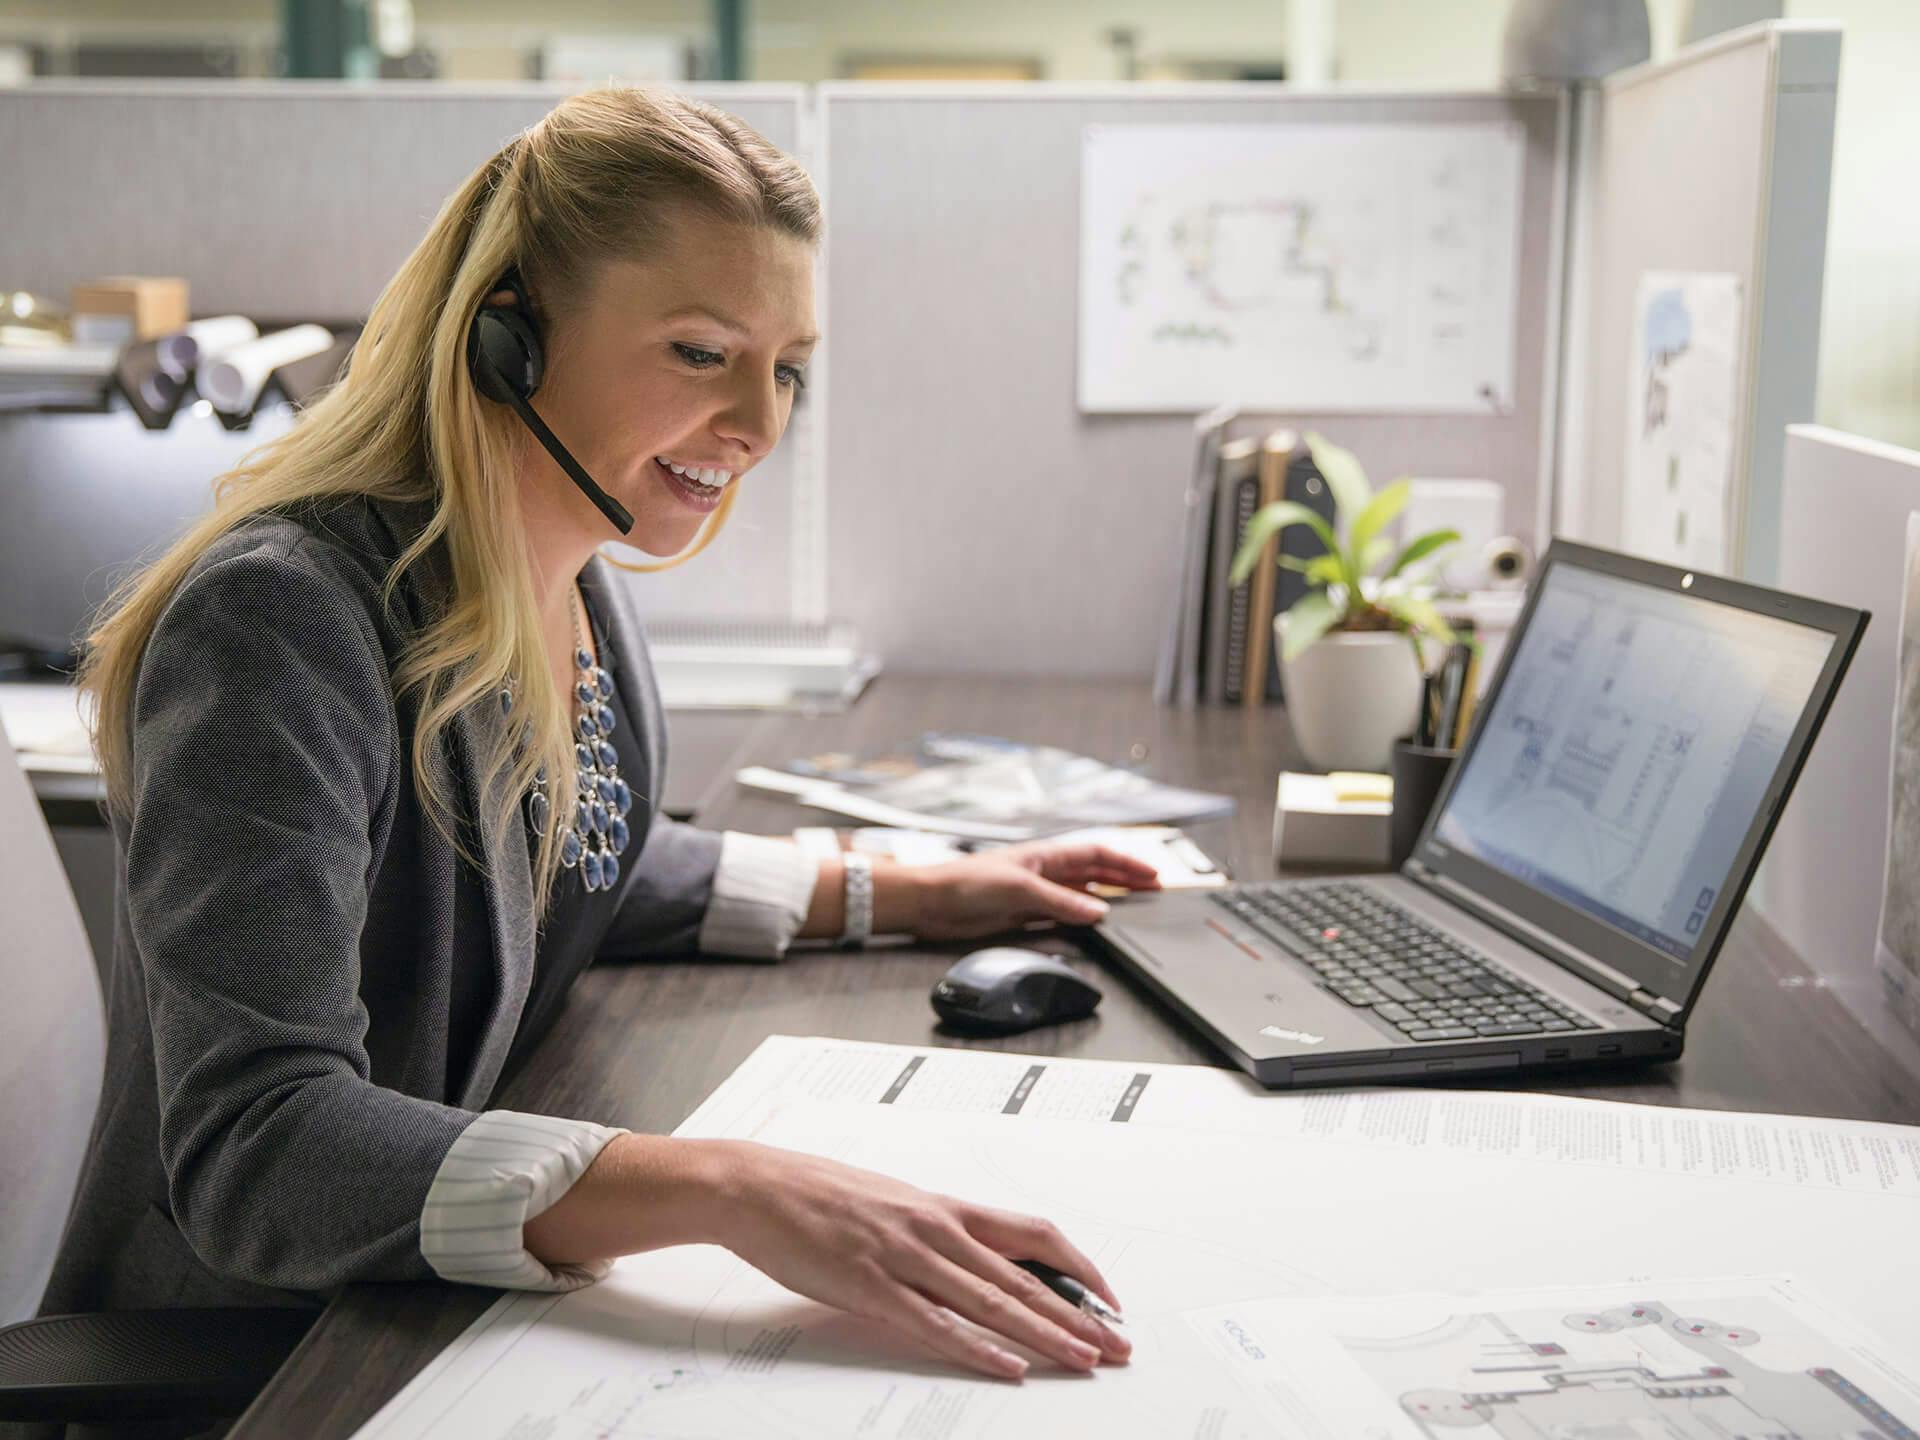 Customer service worker sitting at a desk wearing a headset